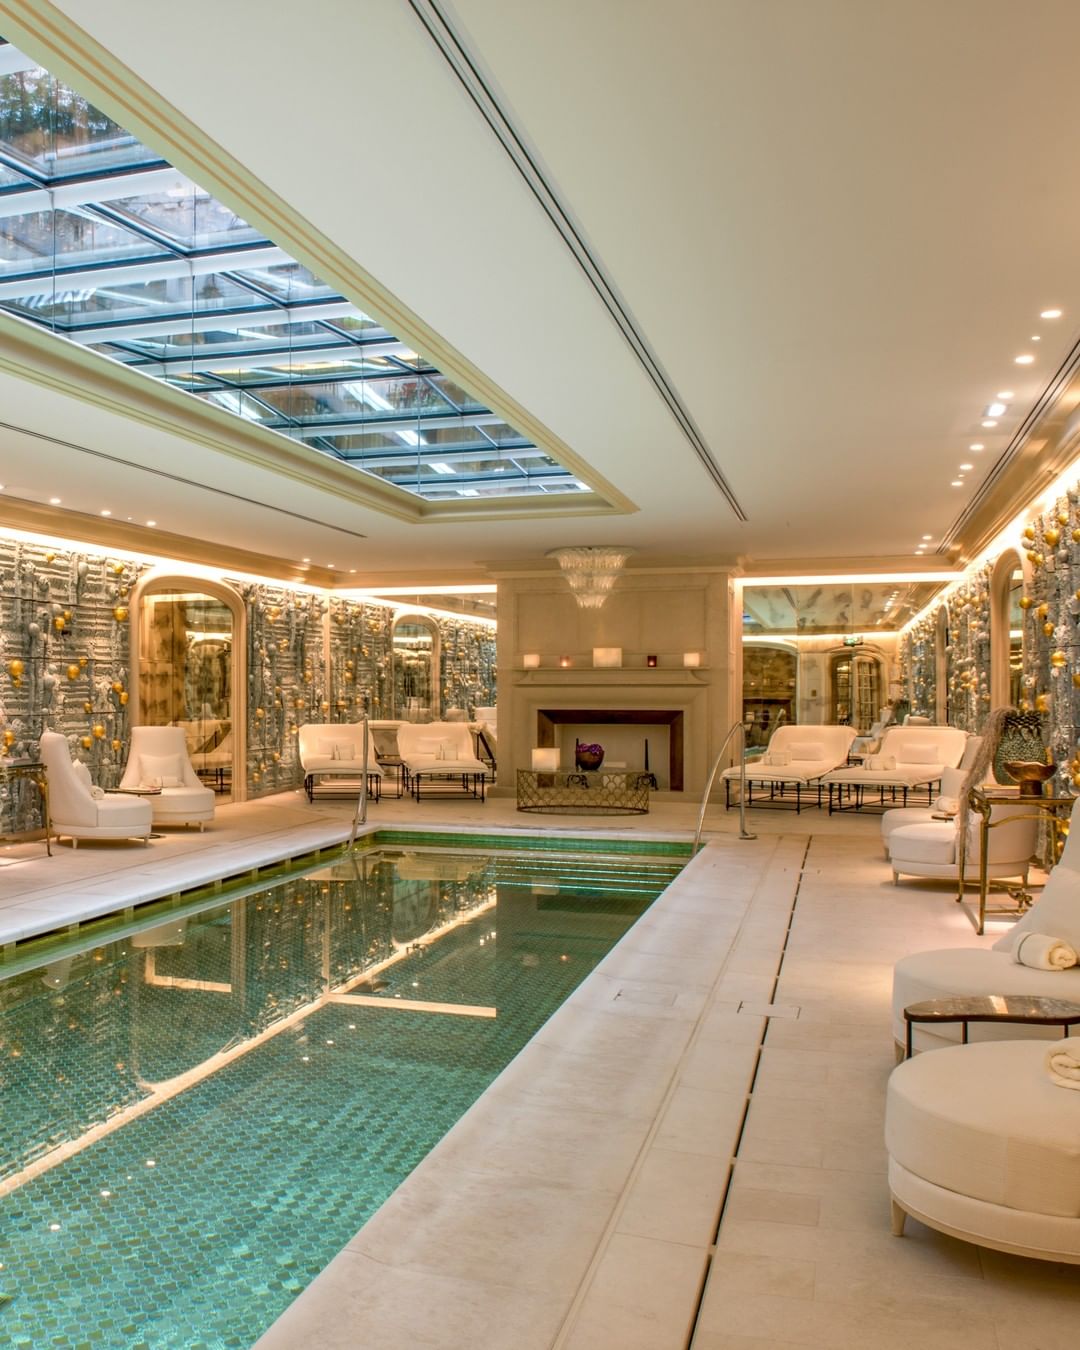 The luxe pool at Hotel de Crillon Paris with white lounge furniture, stone floors, mirrored walls and 17,600 gold scales at the base of the pool to give the water a glistening siren effect